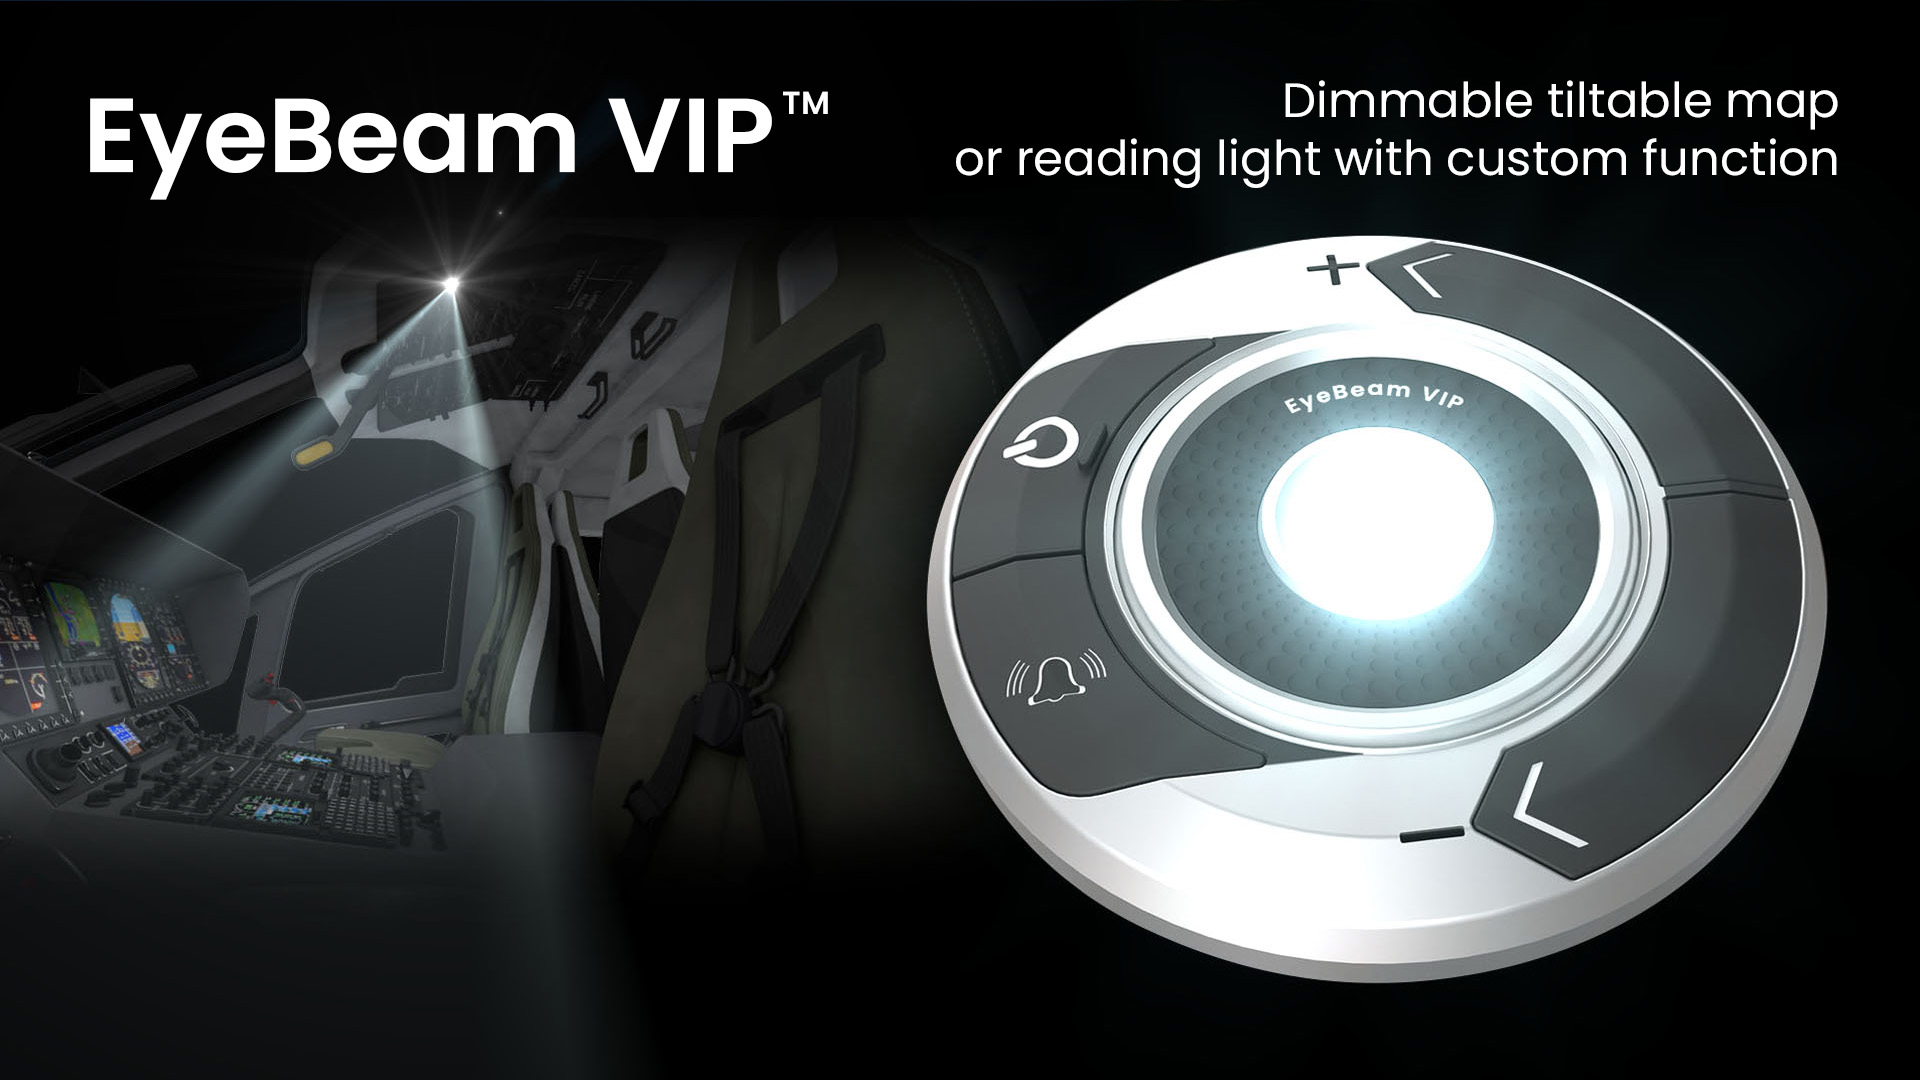 EyeBeam VIP - Aircraft interior dimmable tiltable map or reading light with custom function